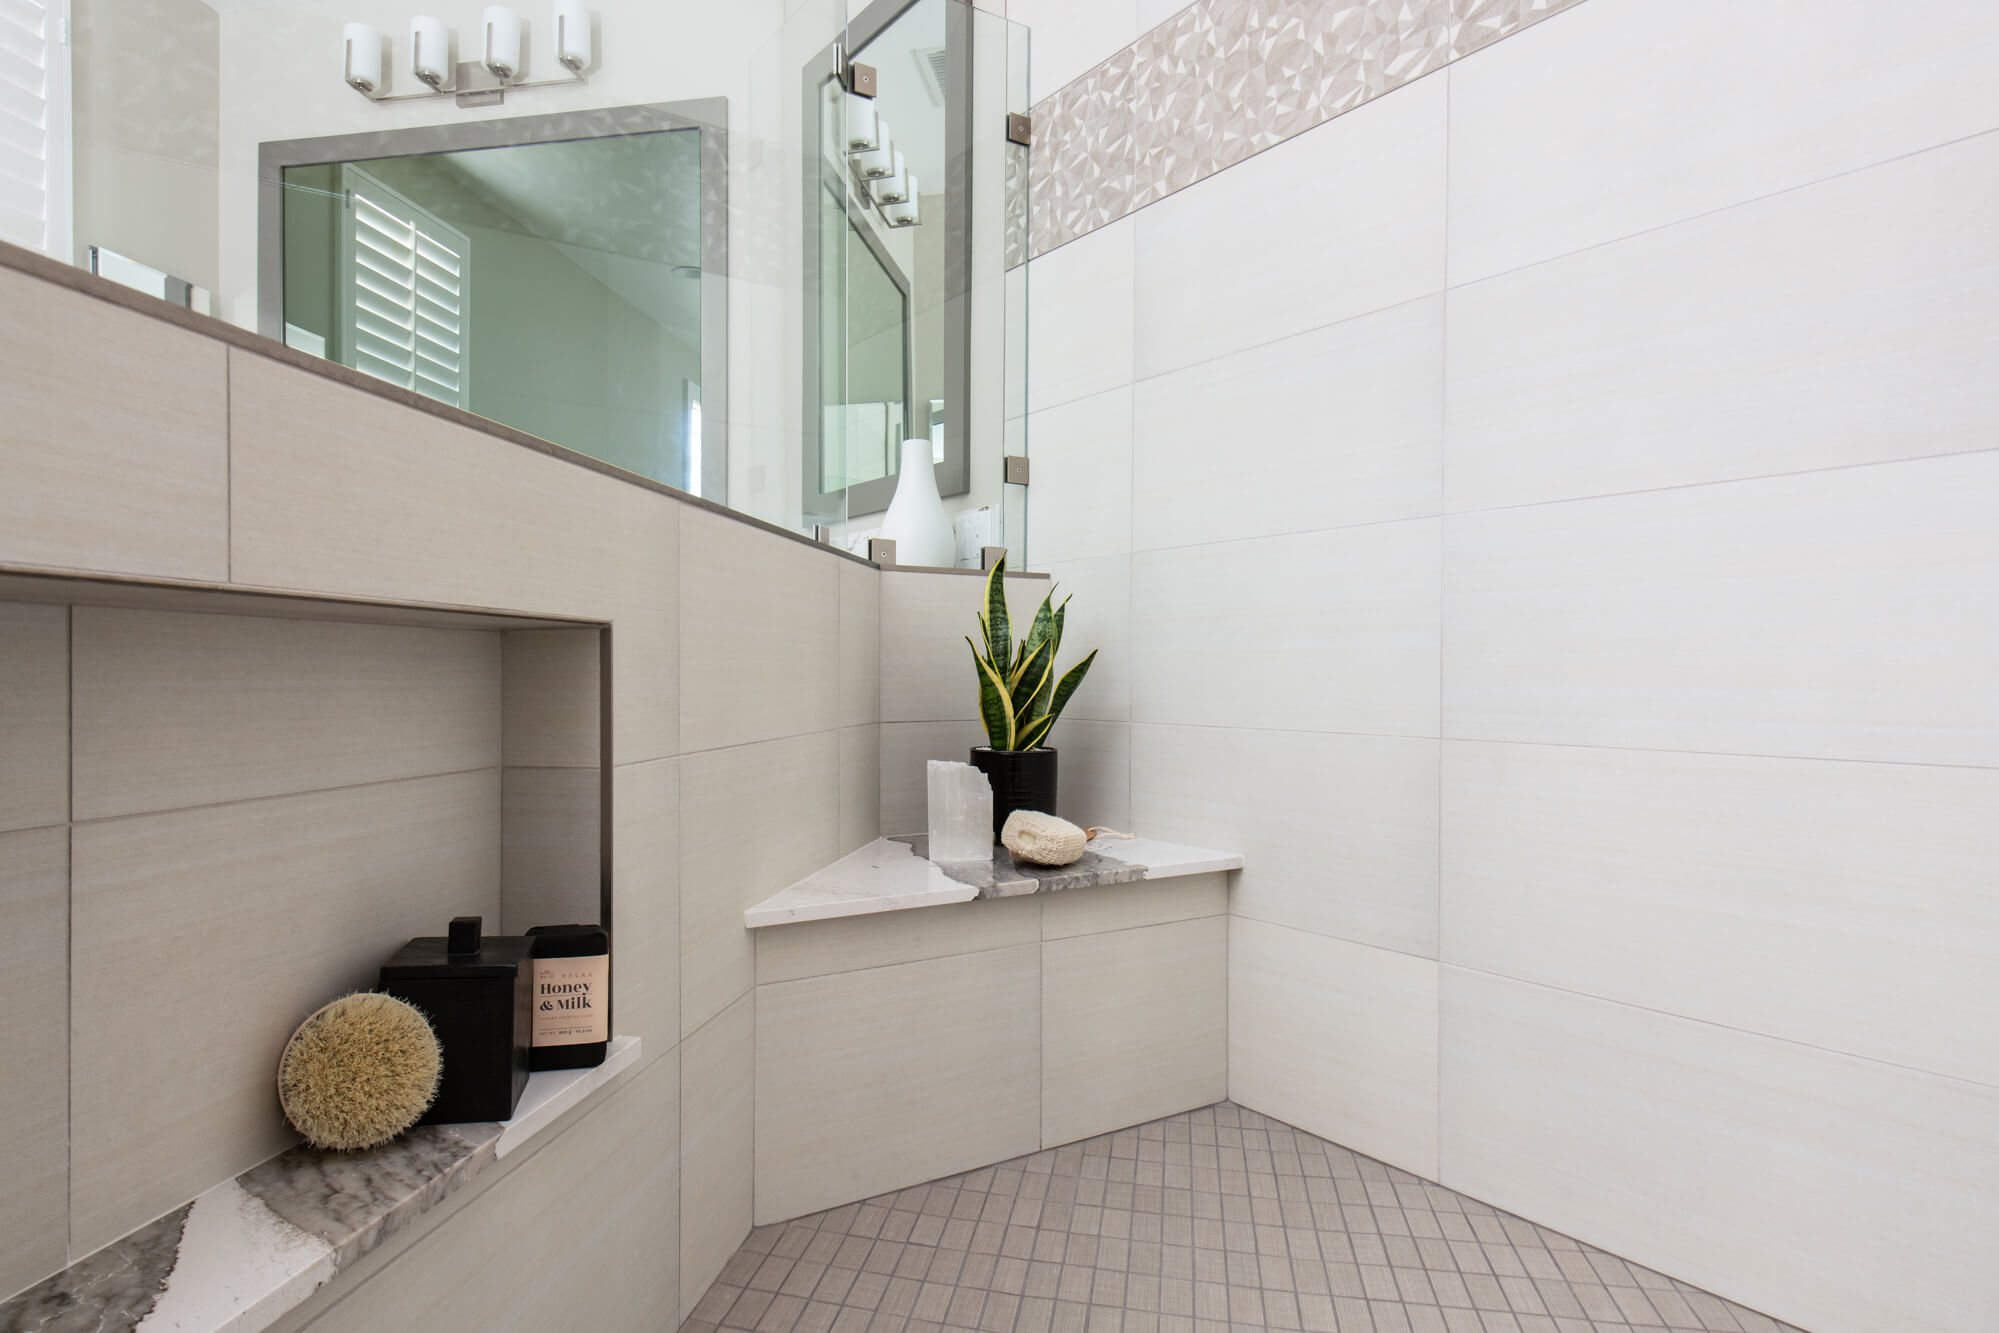 Walk in shower with shampoo niche and bench - function-packed home improvements